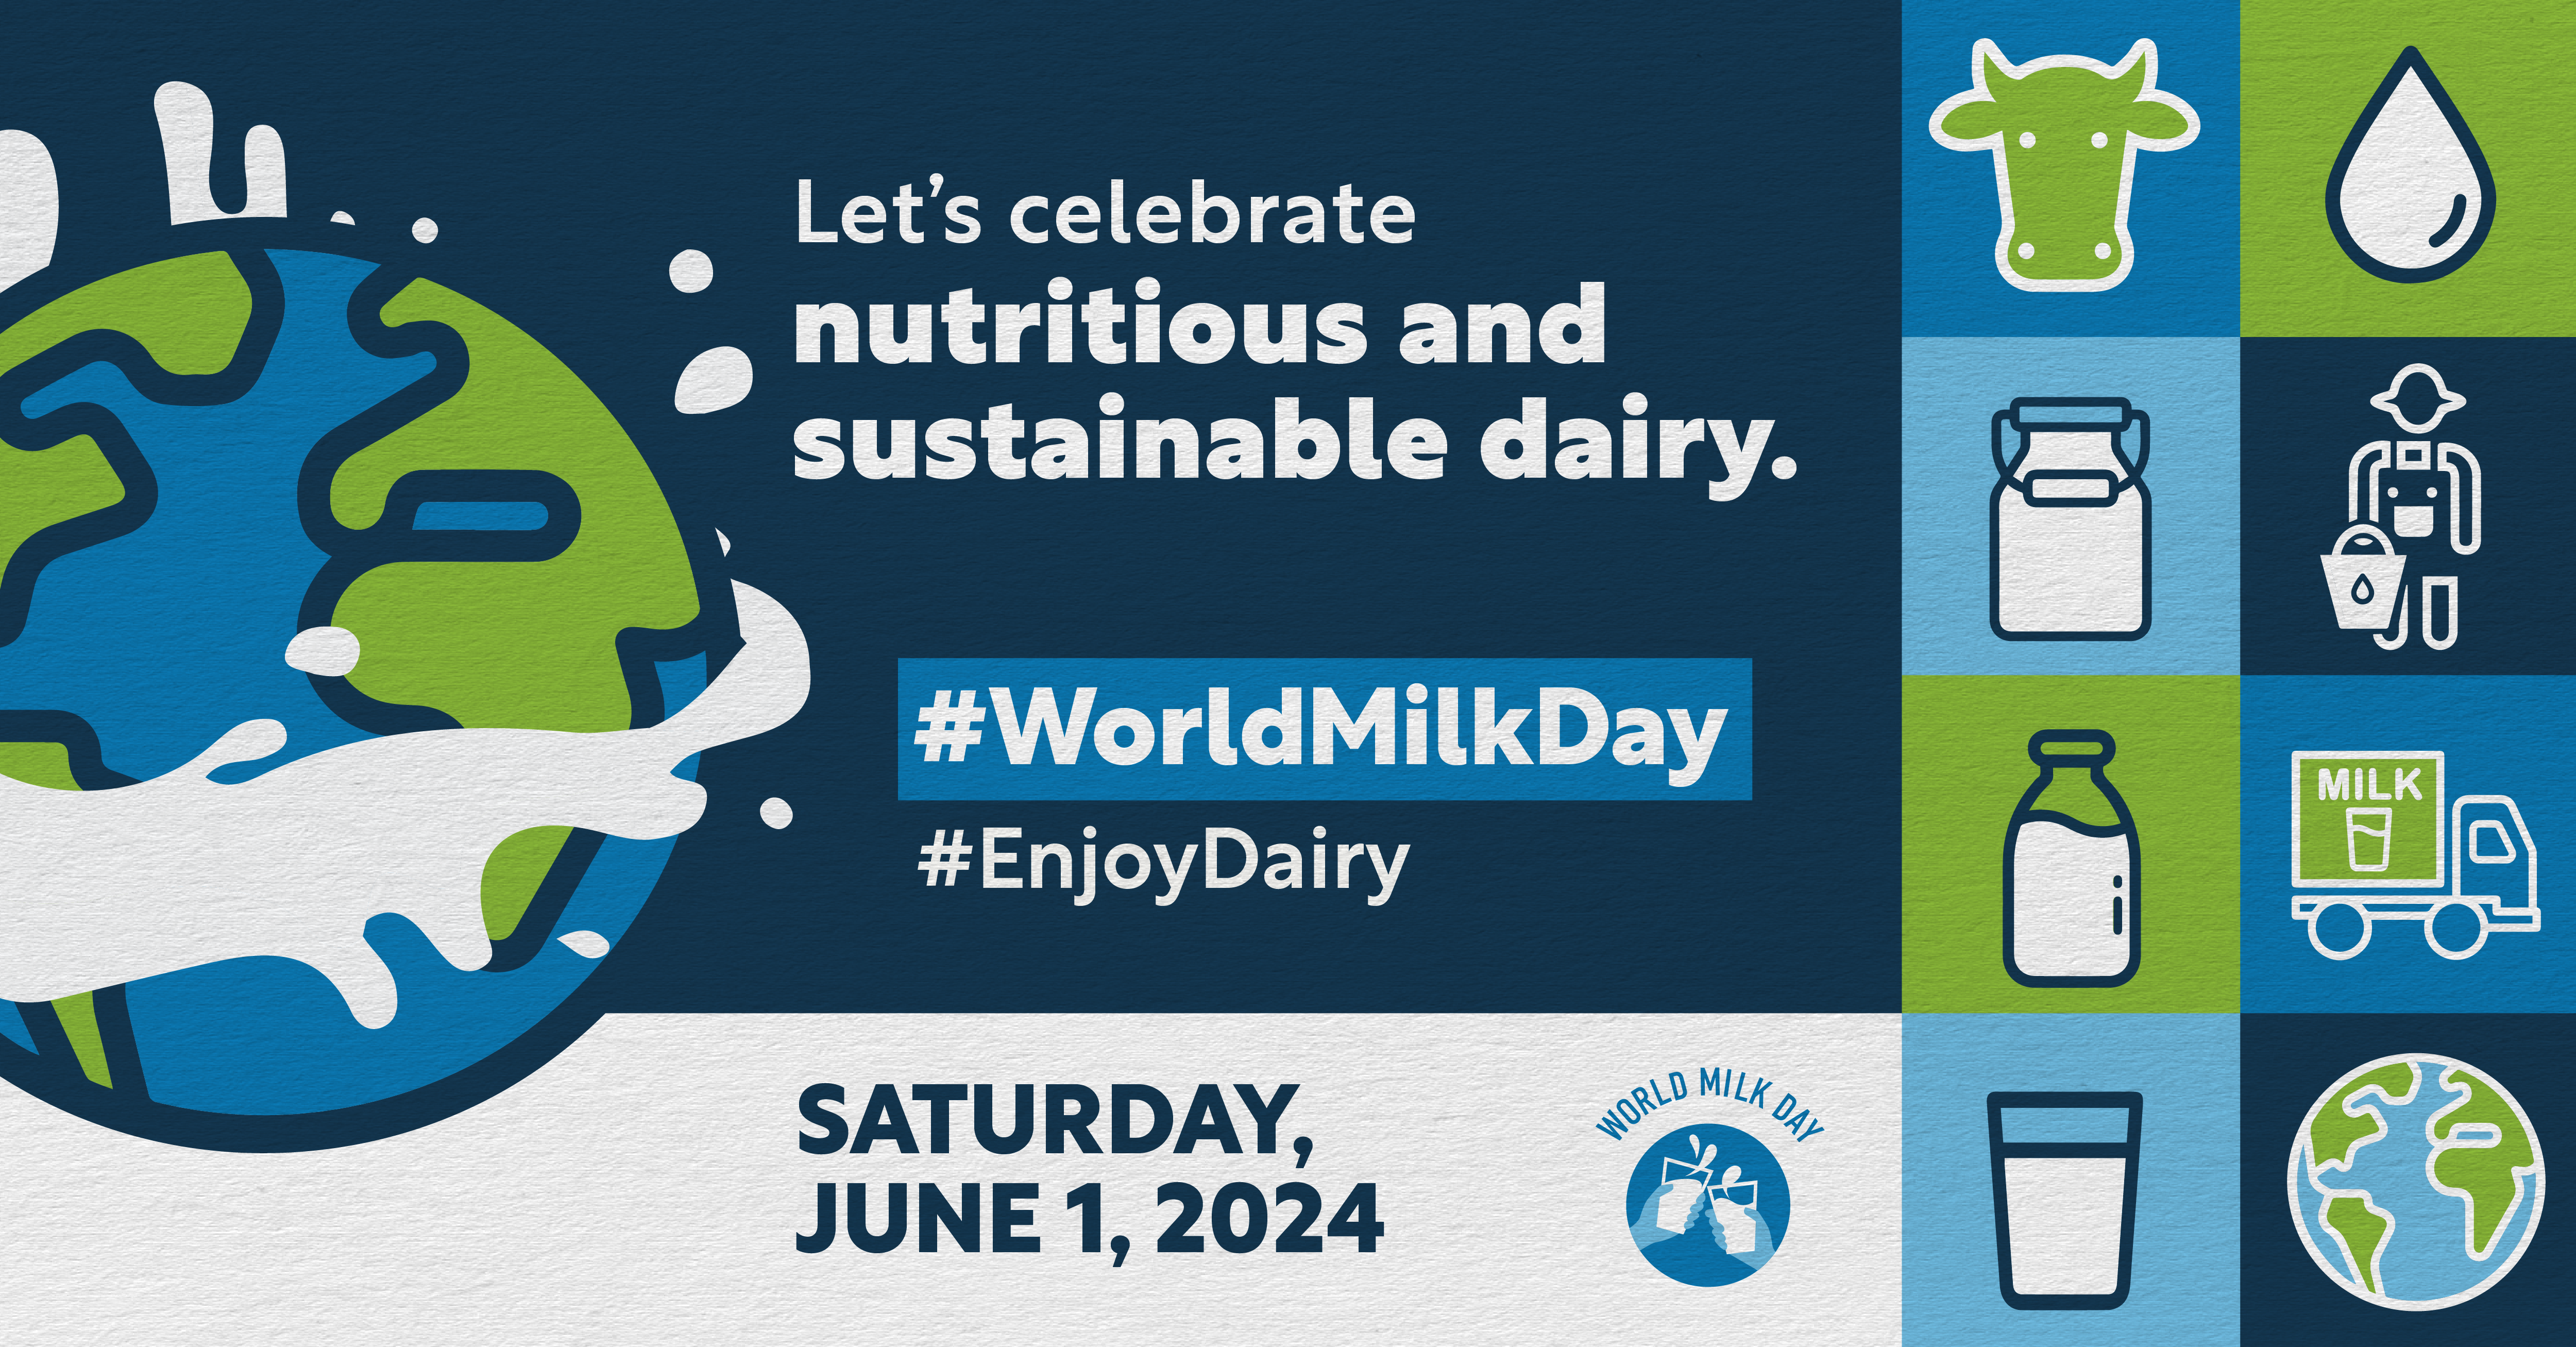 2024 World Milk Day Campaign Material Launched